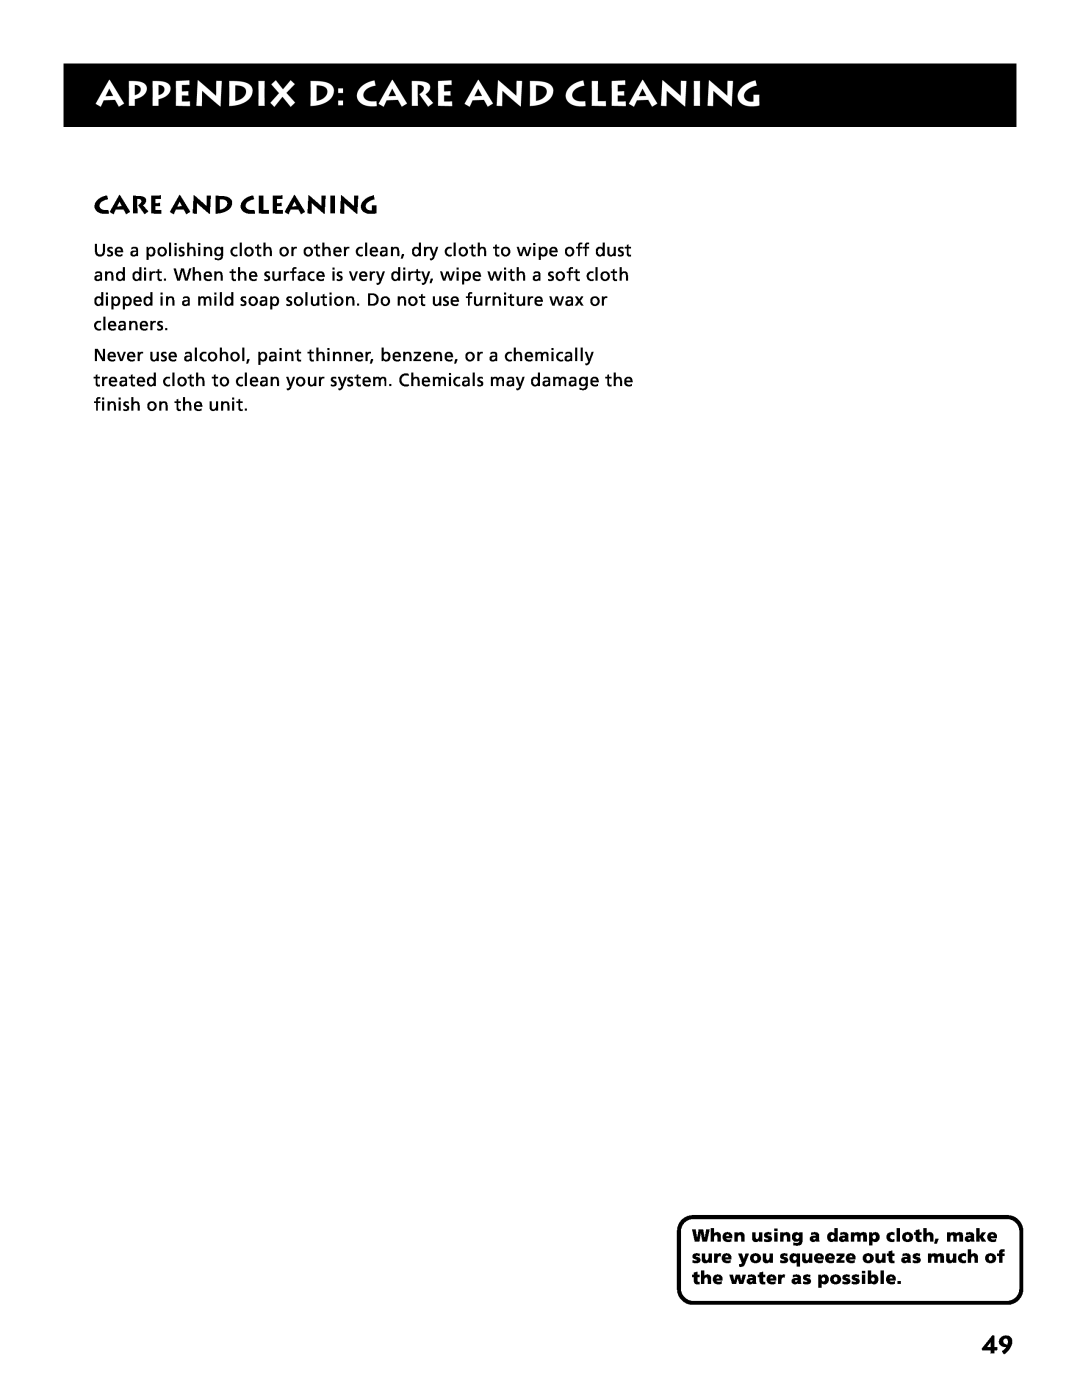 Electrohome RV-3798 manual Appendix D Care And Cleaning 